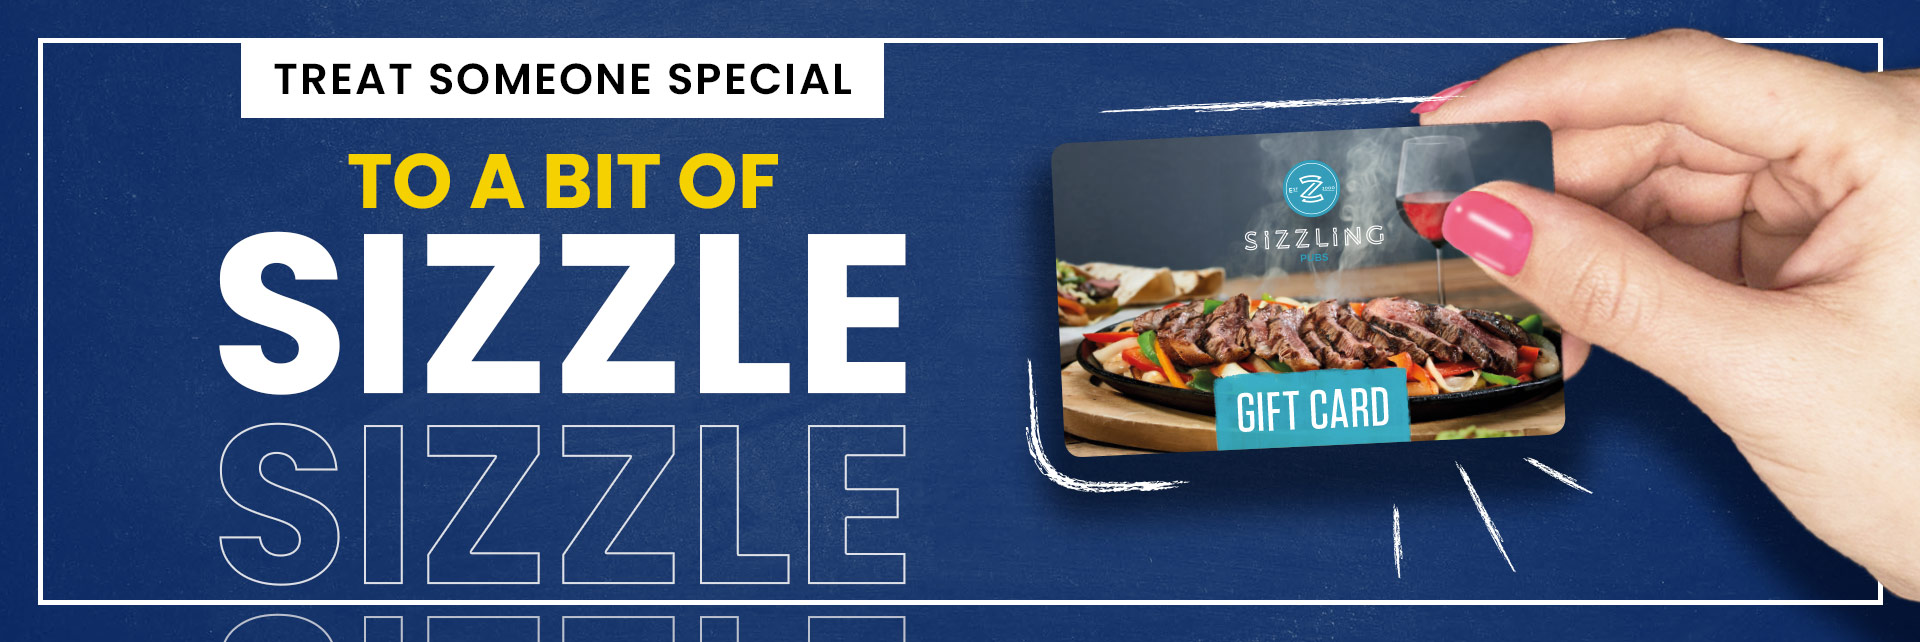 Sizzling Pubs Gift Card at The George in Oldbury